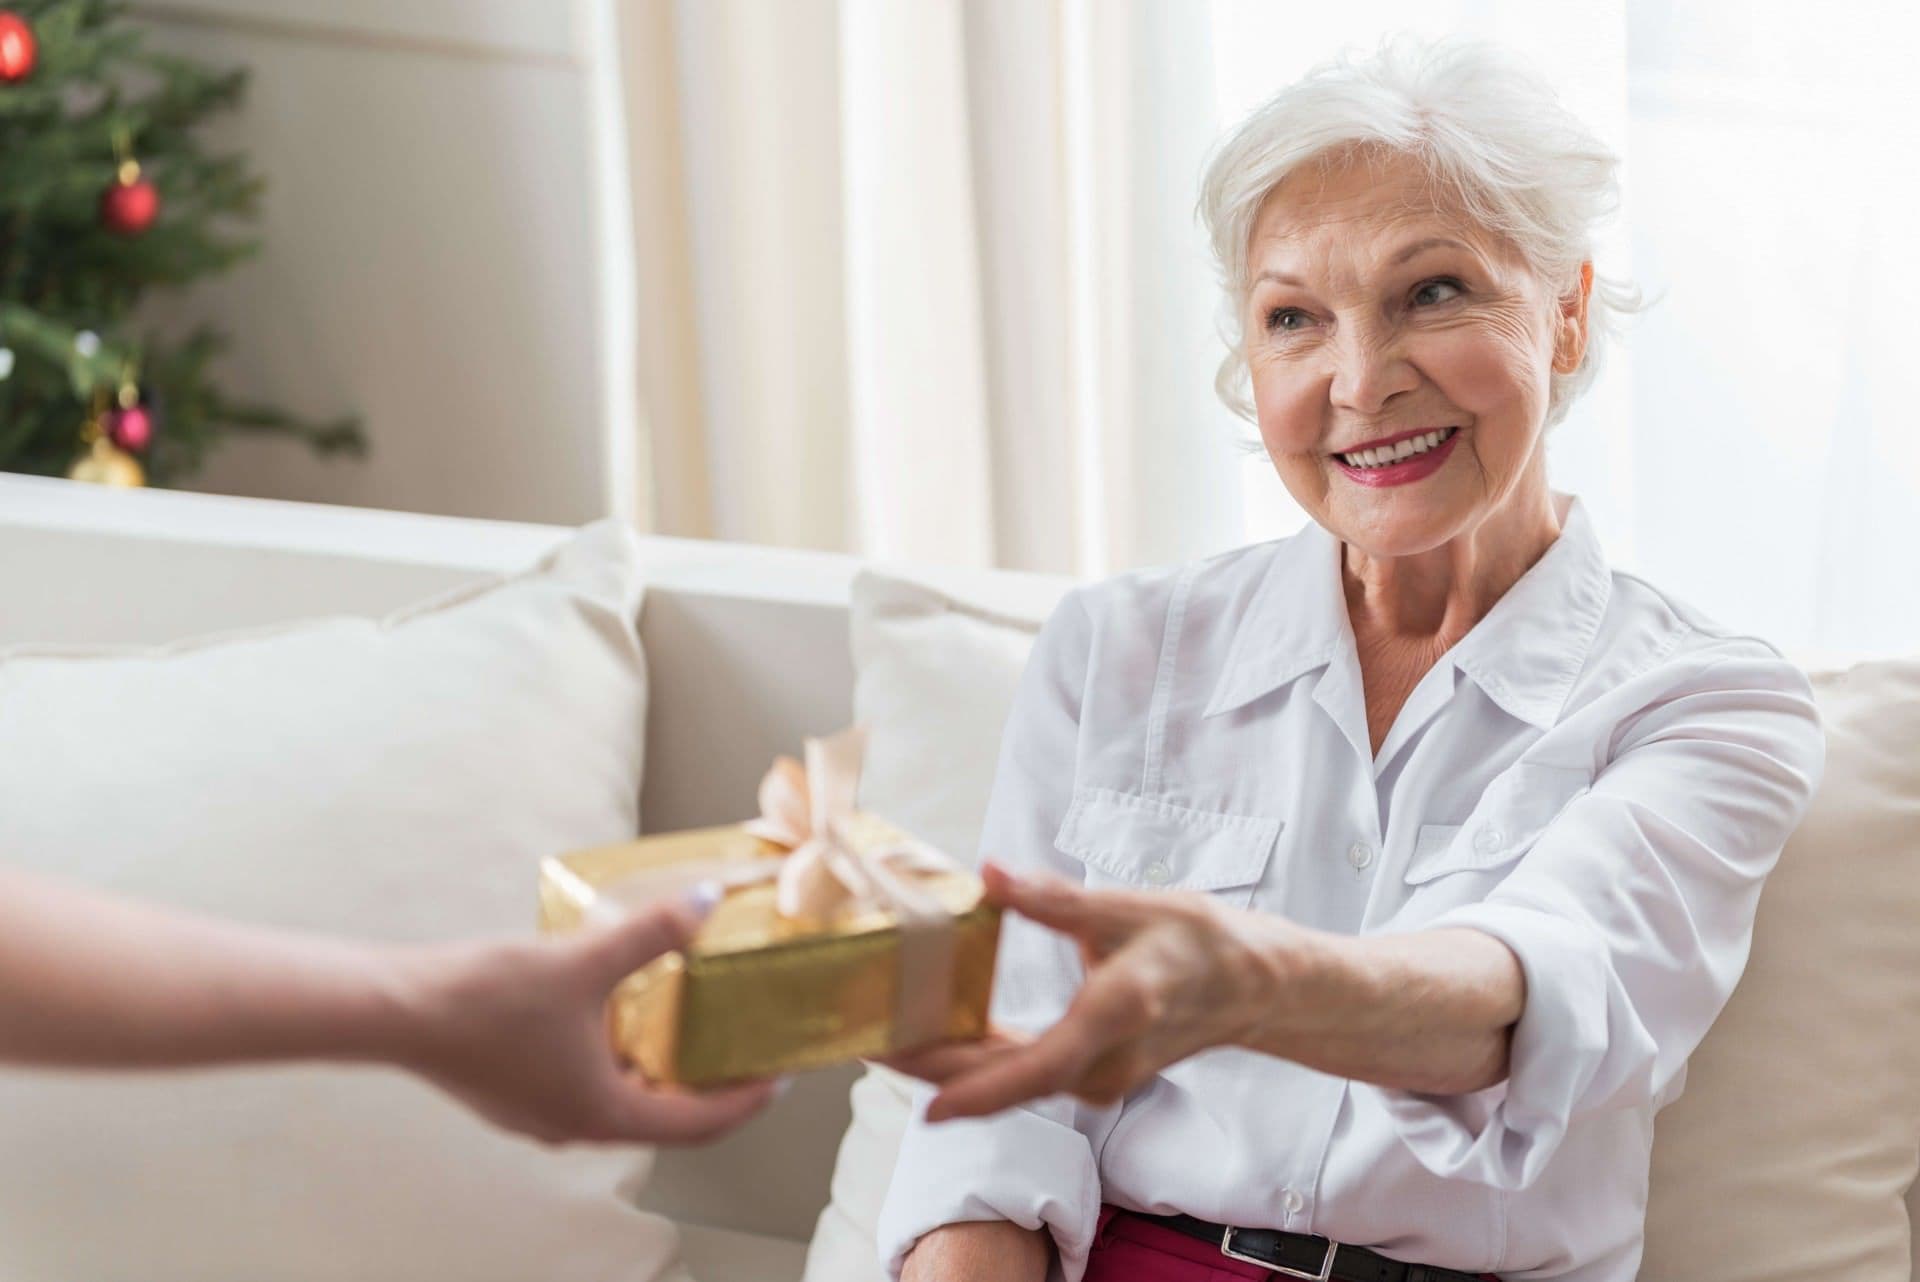 Senior Gift Ideas for Your Elderly Loved Ones This Holiday Season